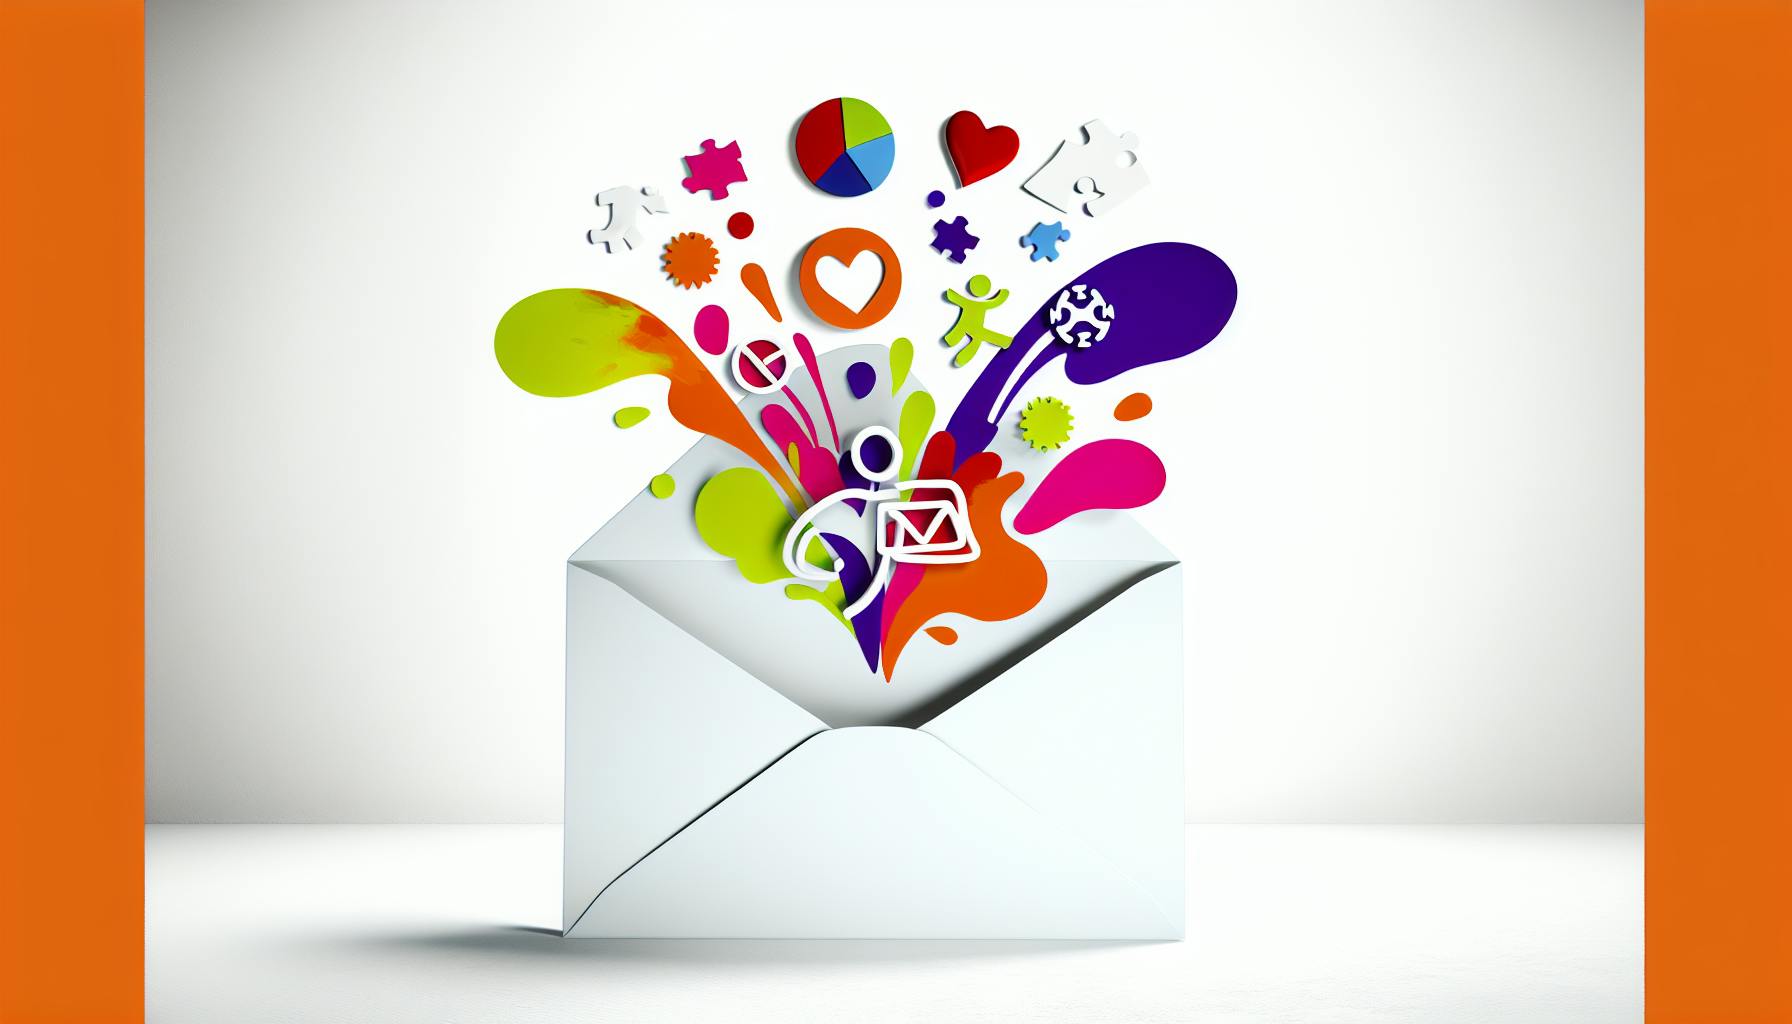 Email Marketing Best Practice Guide for Engagement